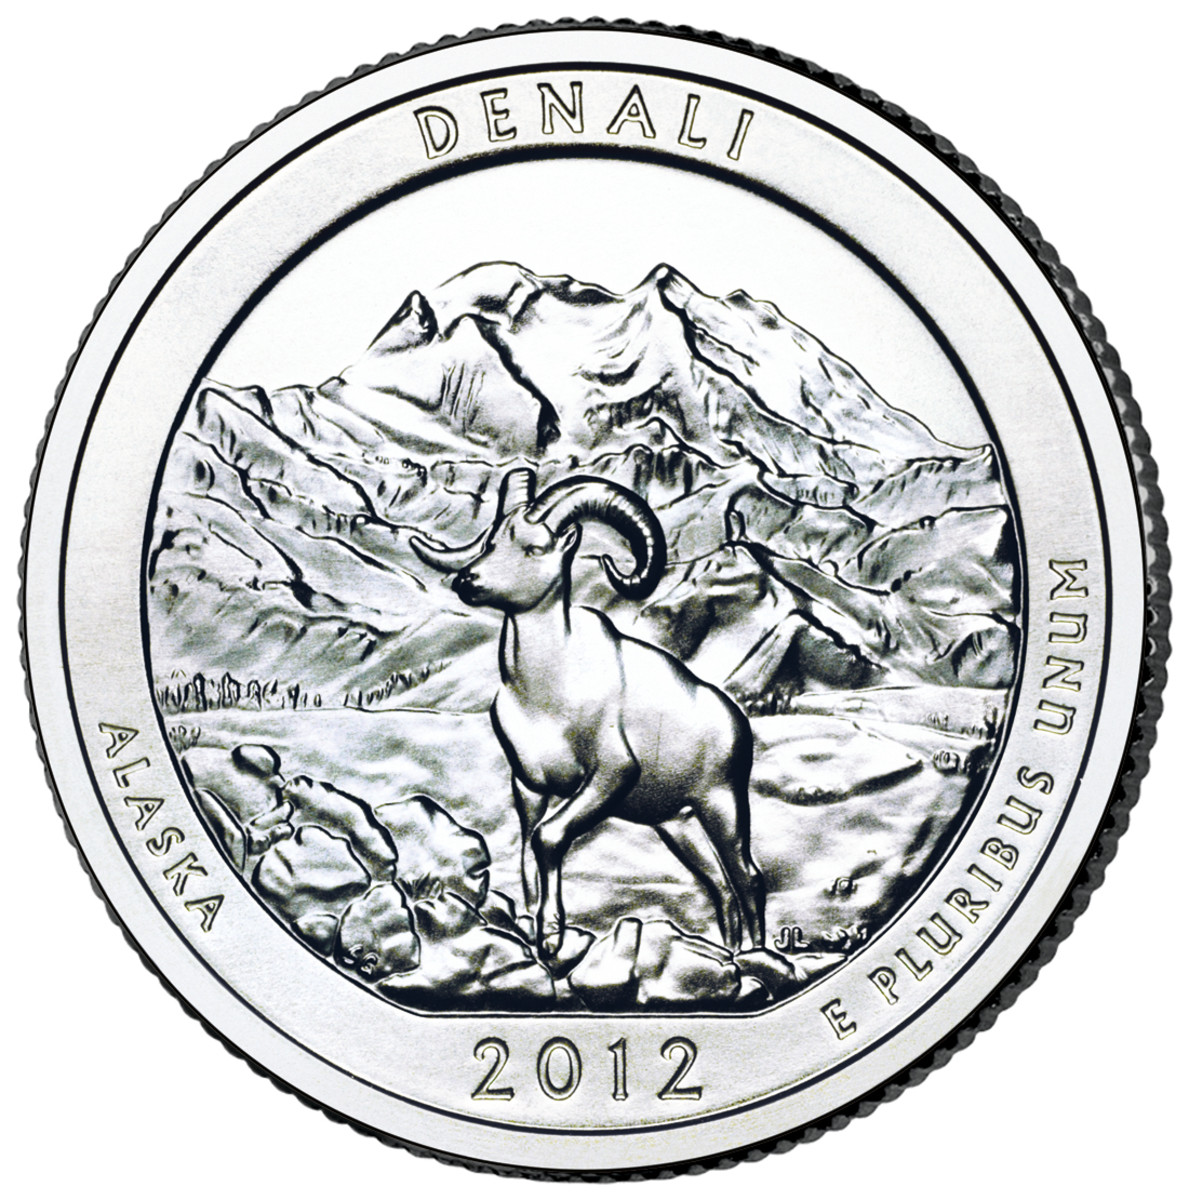 One collector's find of an S-mint Denali quarter has sparked other collectors discussing finding other collector only S-mint quarters.